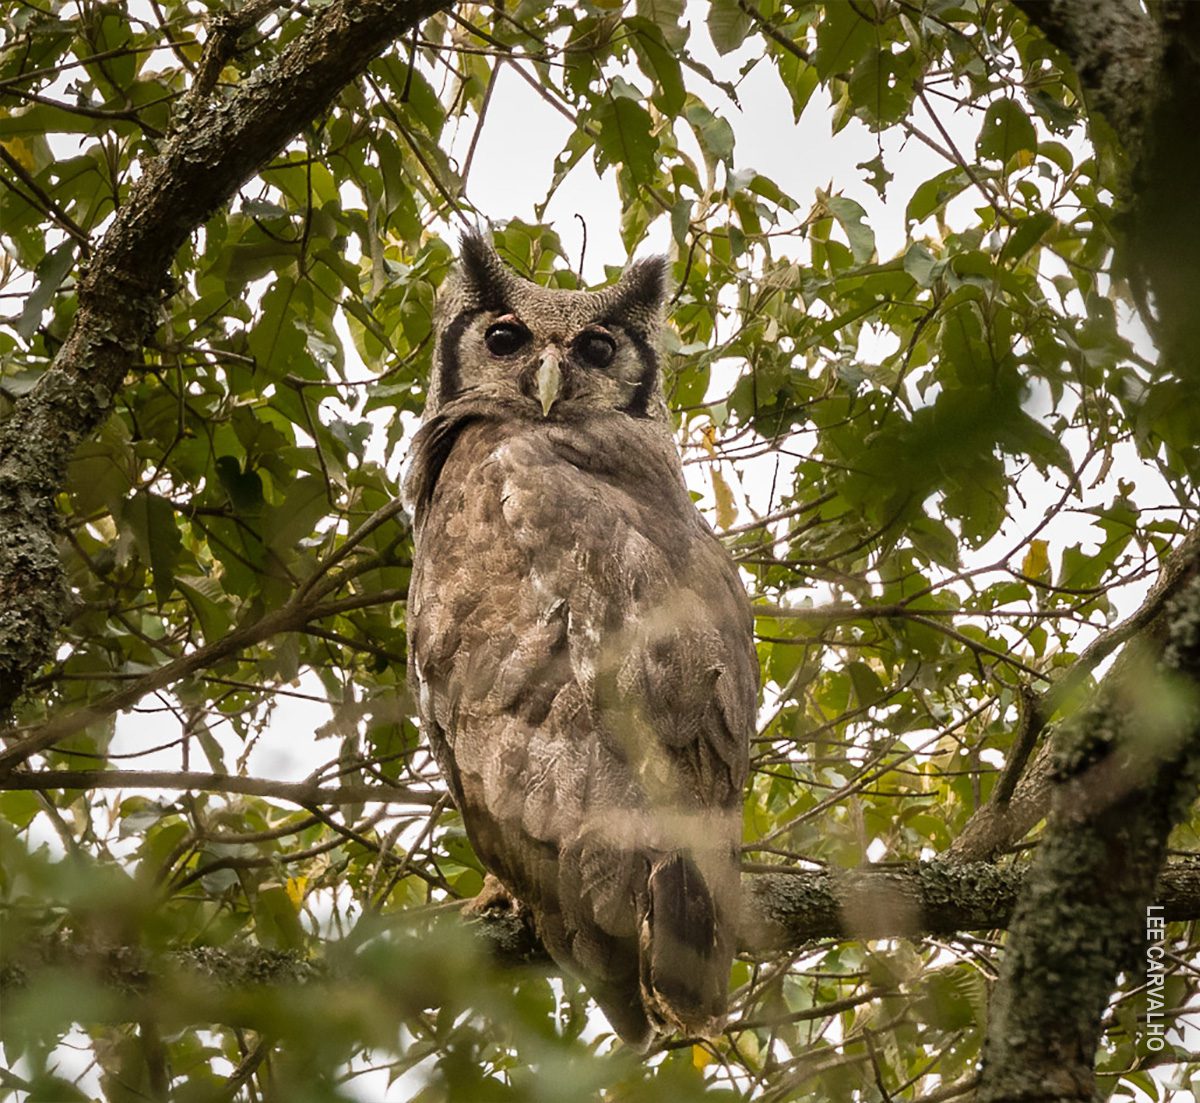 eagle owl in tree spotted on bird walk